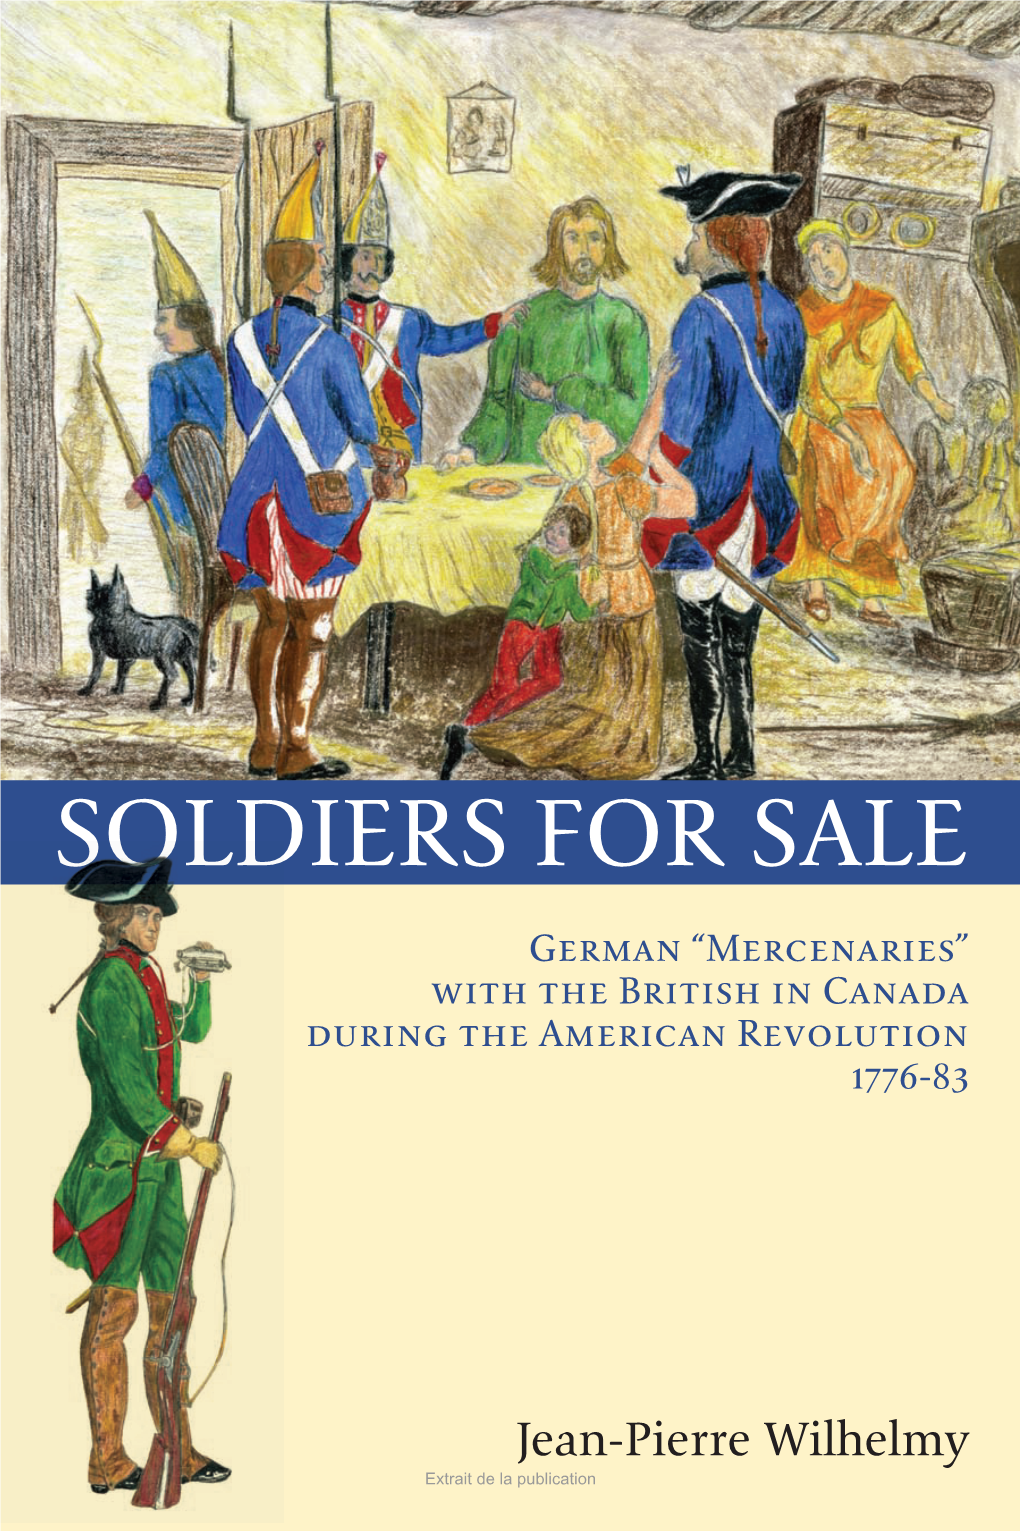 Soldiers for Sale • German “Mercenaries” with the British In